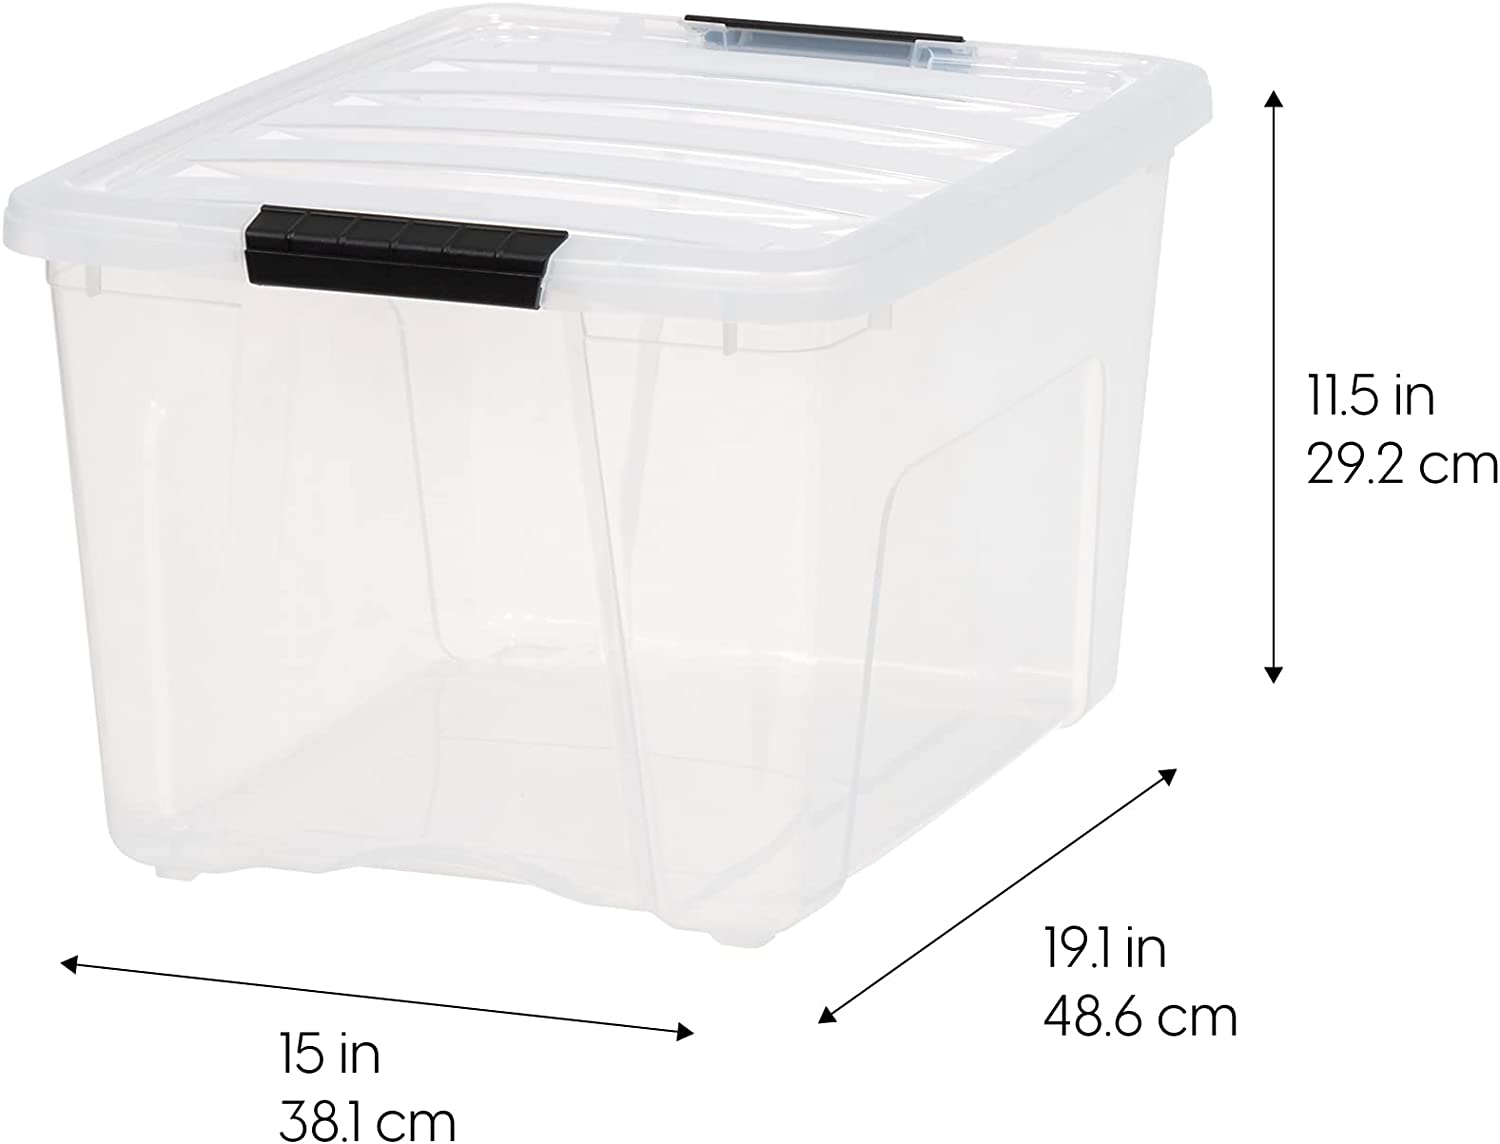 https://bigbigmart.com/wp-content/uploads/2023/06/IRIS-USA-40-Qt.-Plastic-Storage-Container-Bin-with-Secure-Lid-and-Latching-Buckles-6-pack-Clear-Durable-Stackable-Nestable-Organizing-Tote-Tub-Box-Toy-General-Organization-Medium1-1.jpg